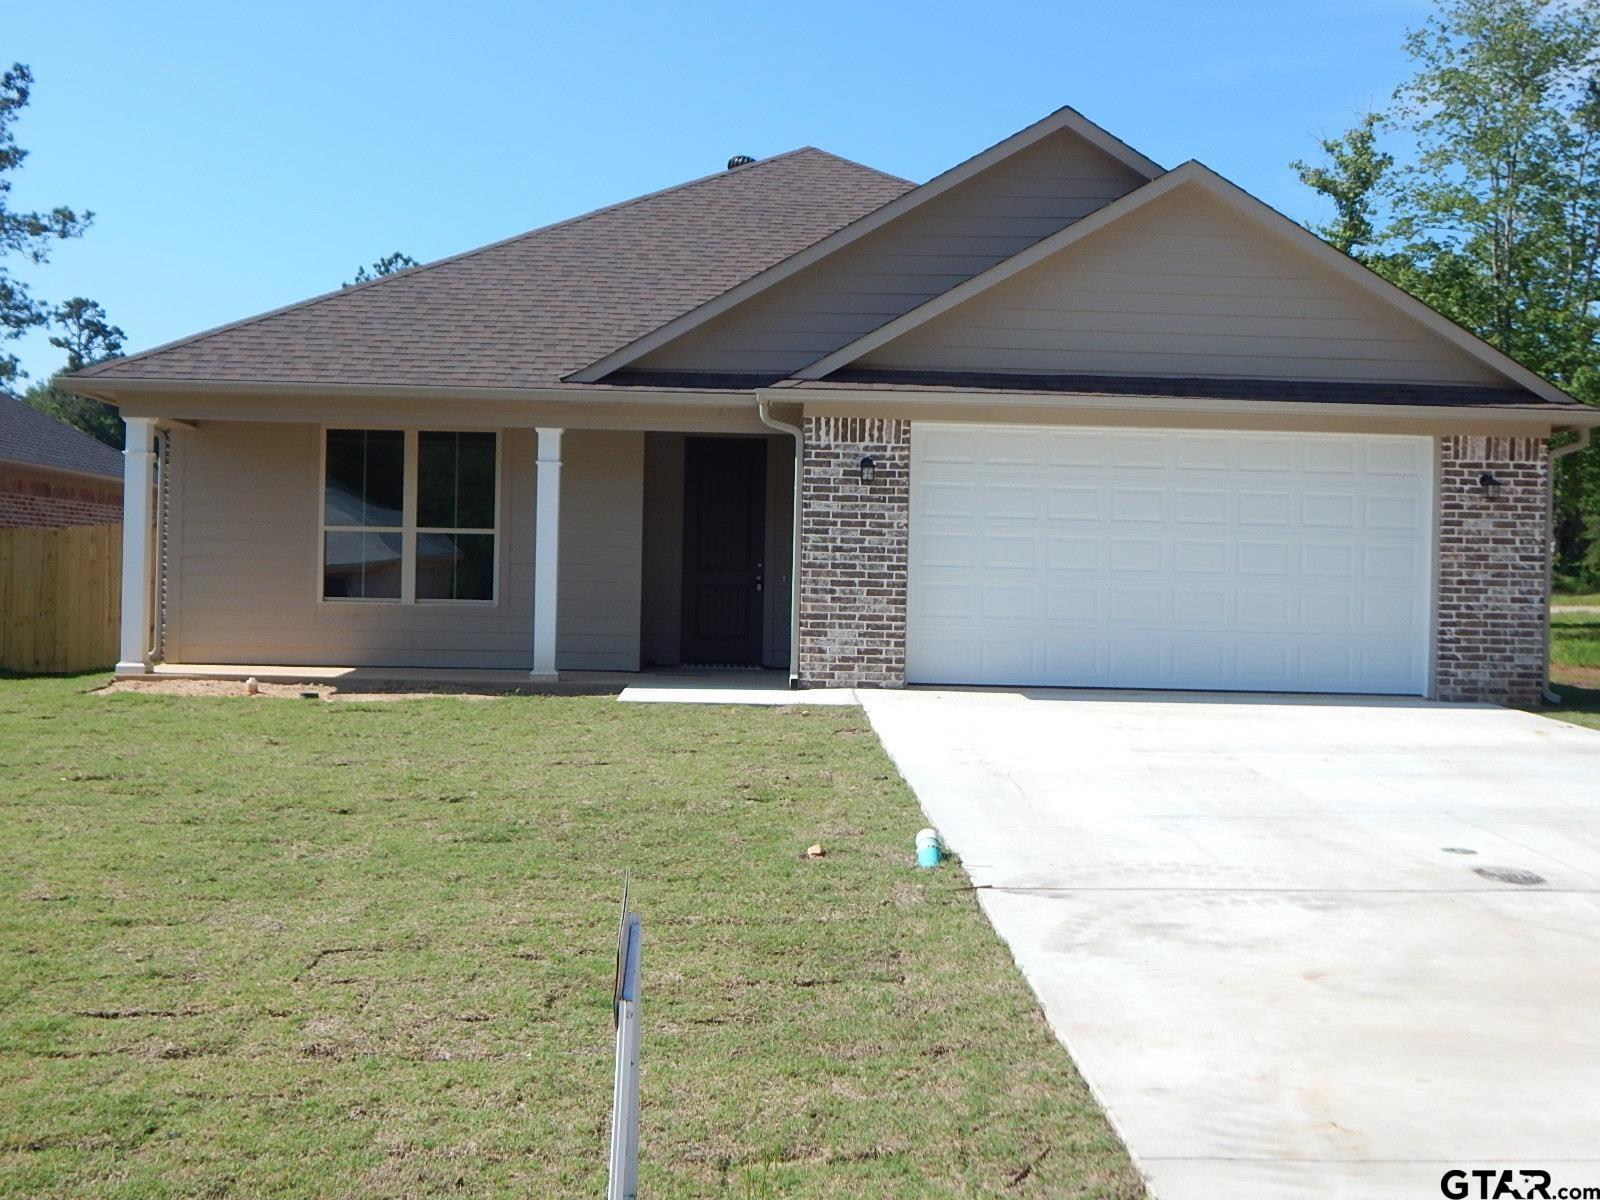 New energy efficient 3 bed, 2 bath NEW CONSTRUCTION brick house in Gilmer, TX. Very nice new house in new subdivision, 1,731 sq. ft, brick and siding, landscaped, with 6' privacy fence, big back yard, two car garage, curbs and gutters, concrete driveway, Lg. hot water heater, granite counter tops, Side by Side Refrigerator included, custom cabinets, light fixtures and more. Plenty of storage with huge pantry, covered patio in back, great floorplan, Vinyl plank in common, tile and carpet in bedrooms Come make this IECC Energy Efficiency Certified house yours before its gone.